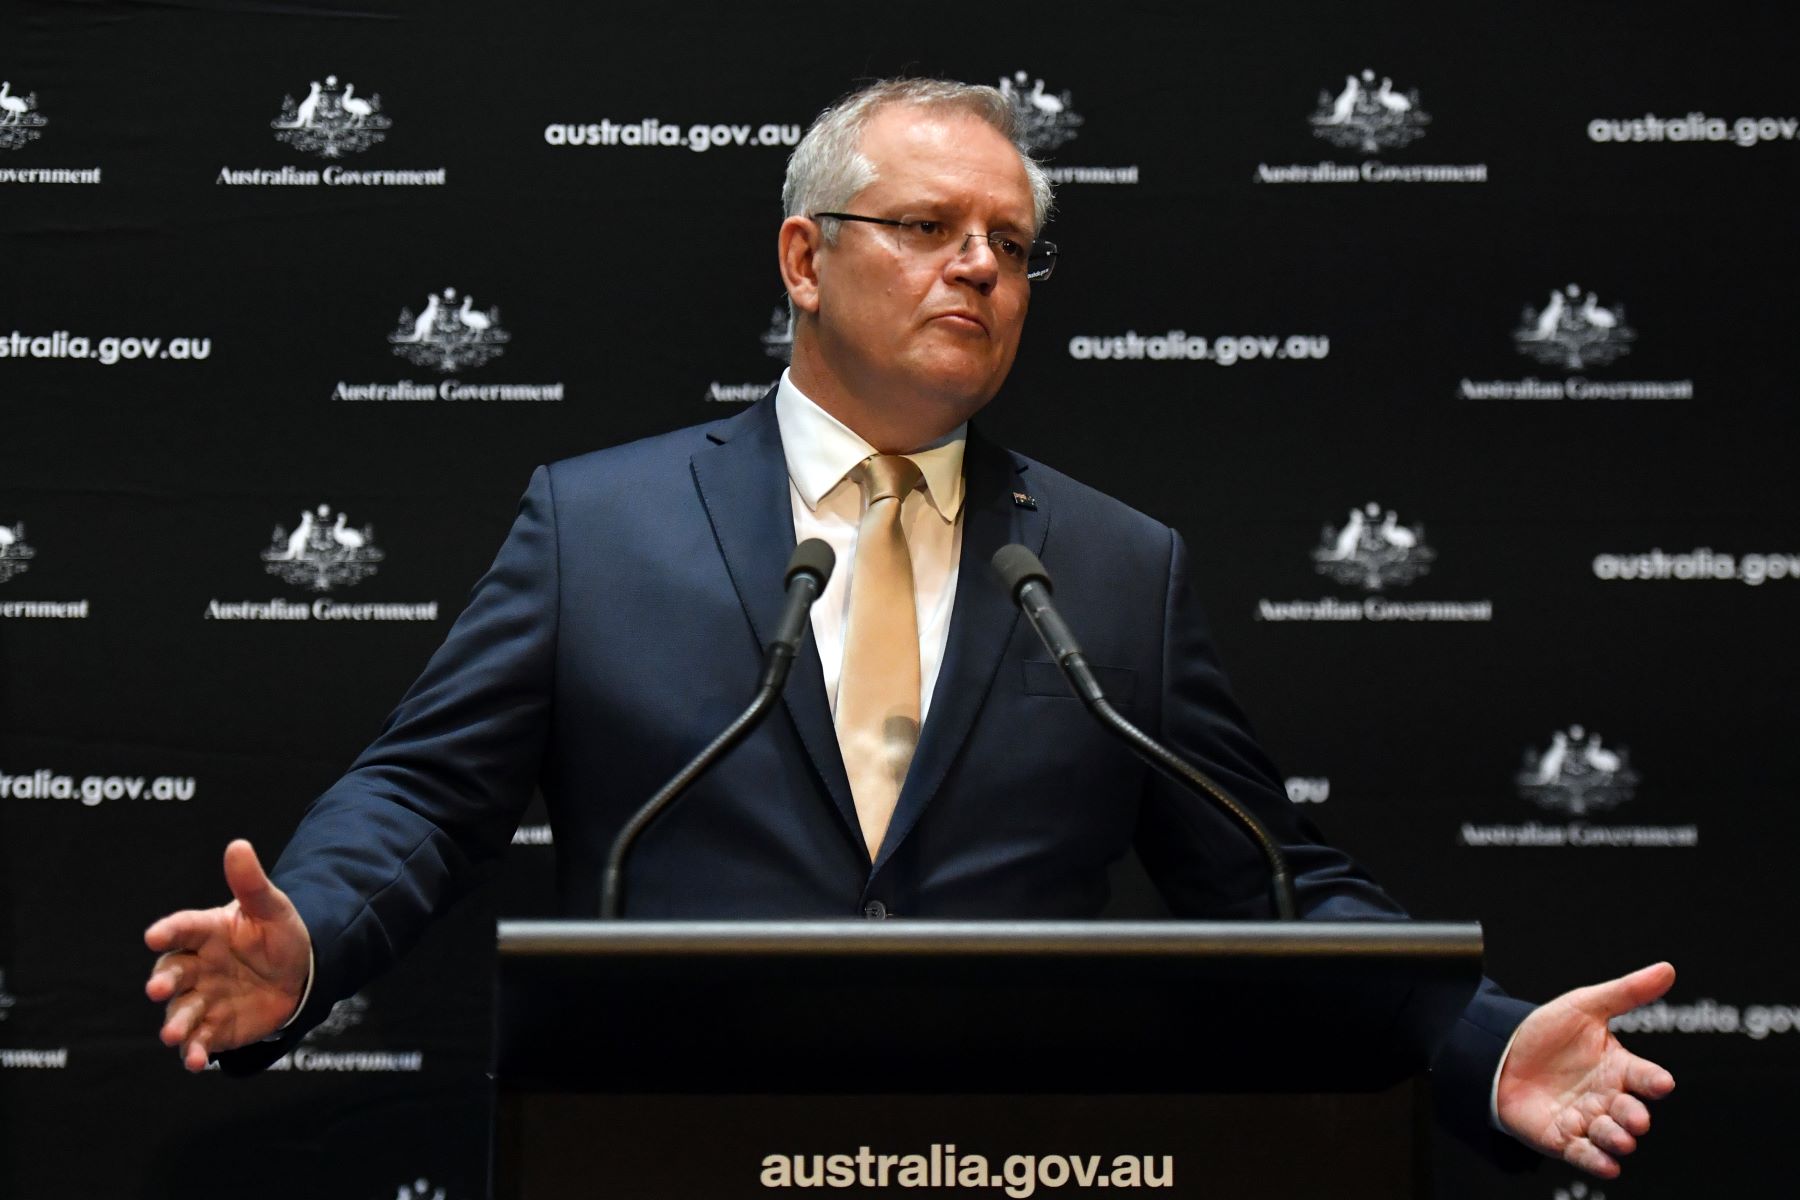 Prime Minister Scott Morrison said temporary visa holders who can't support themselves should return home. 